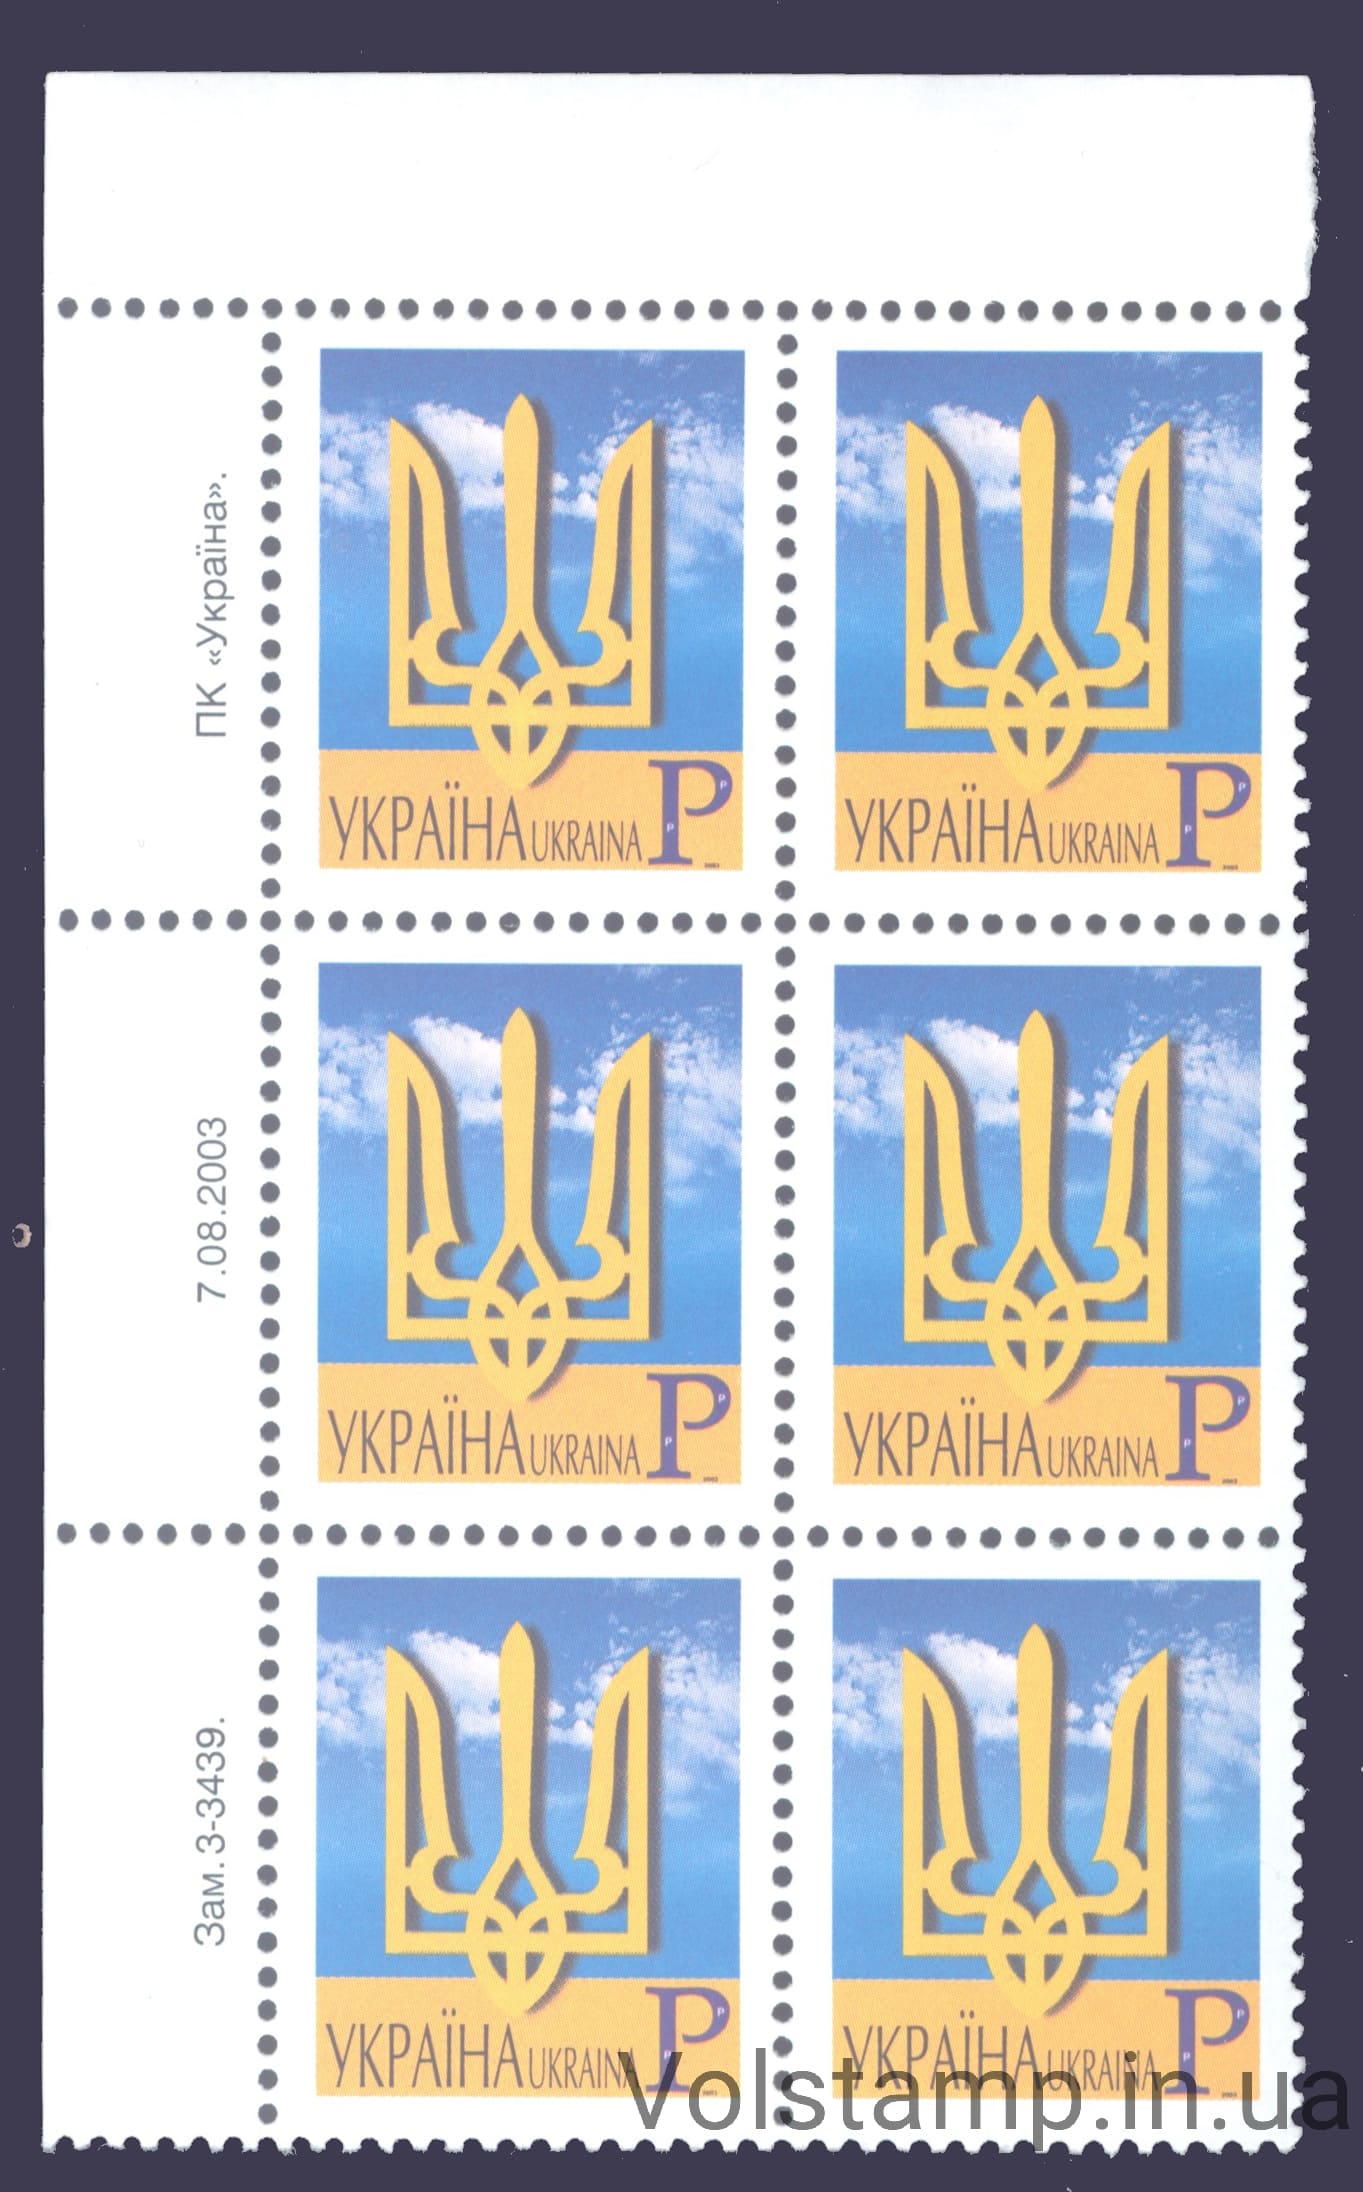 07.08.2003 Standard sixblock P (left top - without perforation) №3-3439